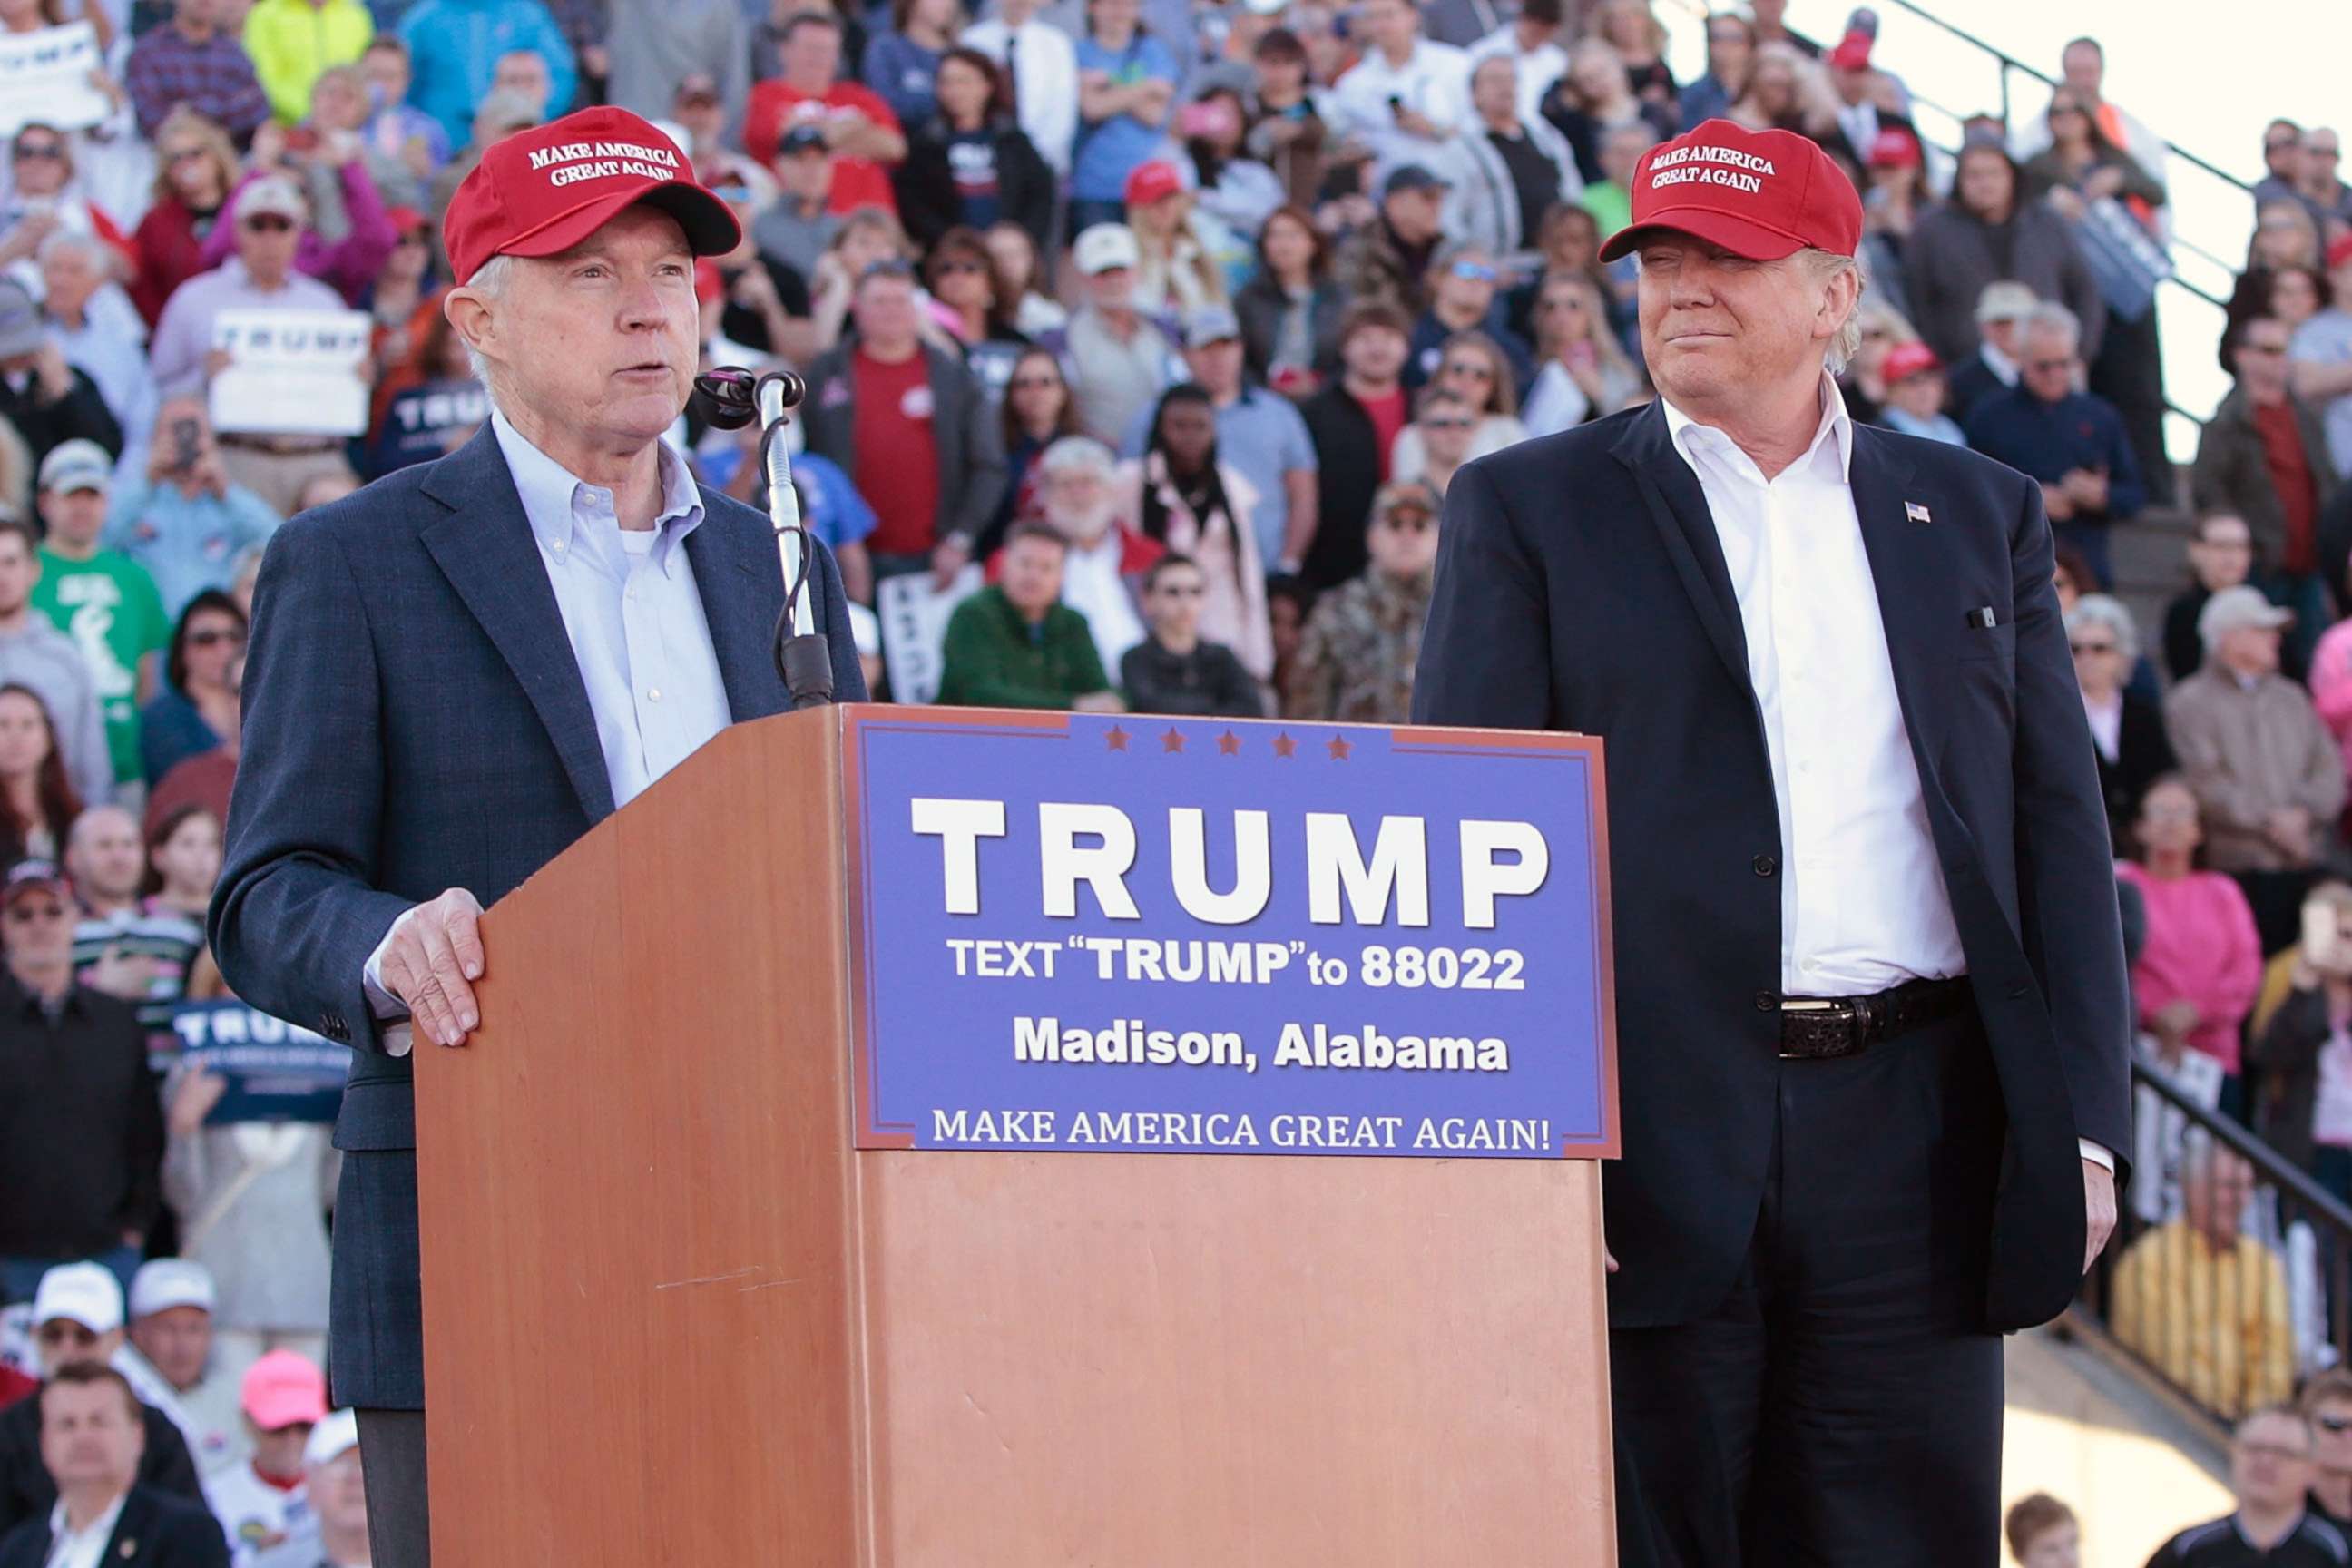 PHOTO: Senator Jeff Sessions becomes the first Senator to endorse Donald Trump for President of the United States at Madison City Stadium on Feb. 28, 2016 in Madison, Alabama.